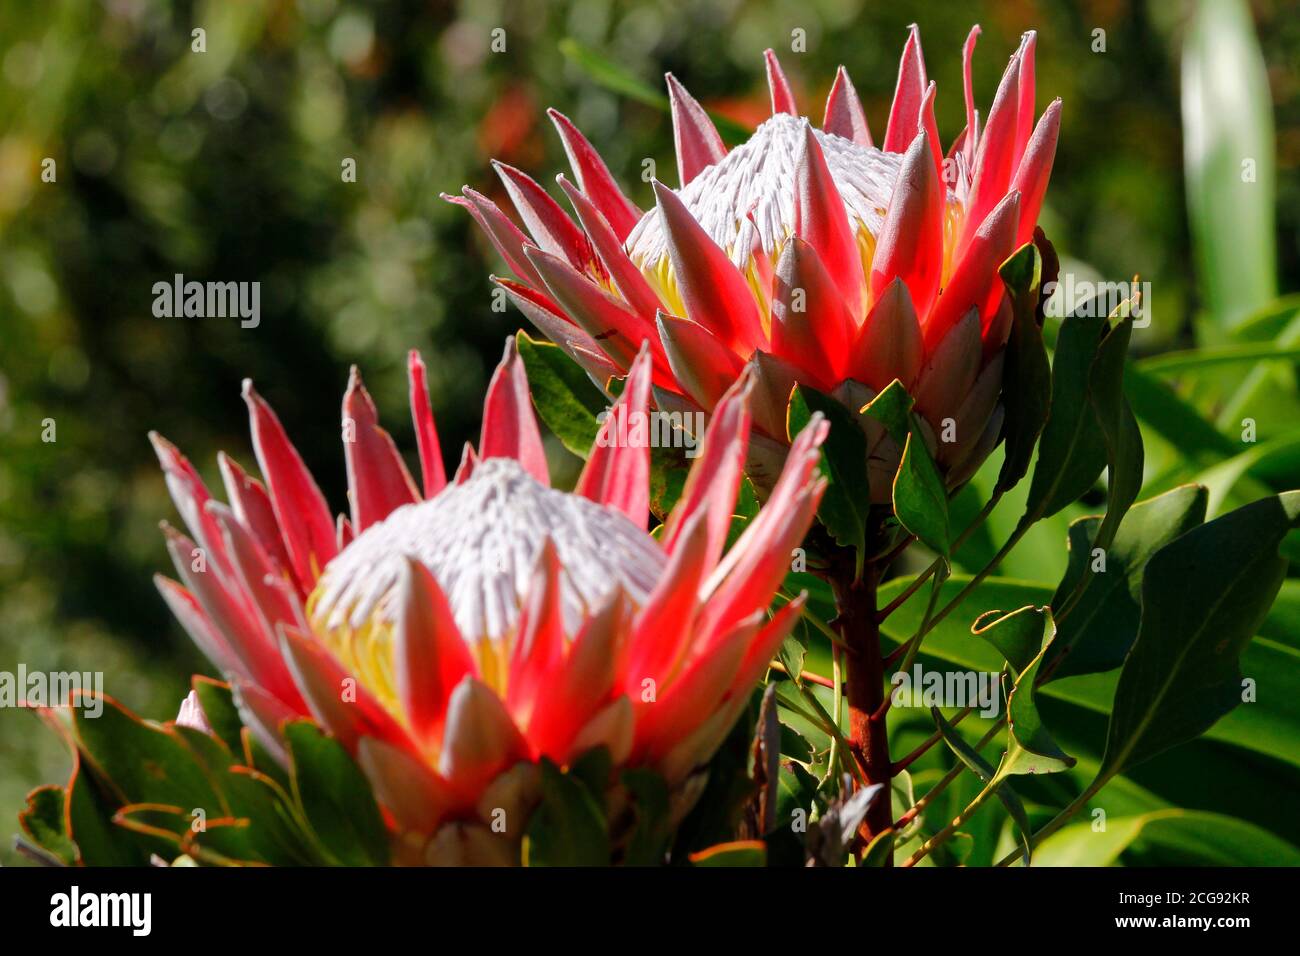 A pair of King Protea flowers photographed in Kirstenbosch National Botanical Gardens in Cape Town. Stock Photo